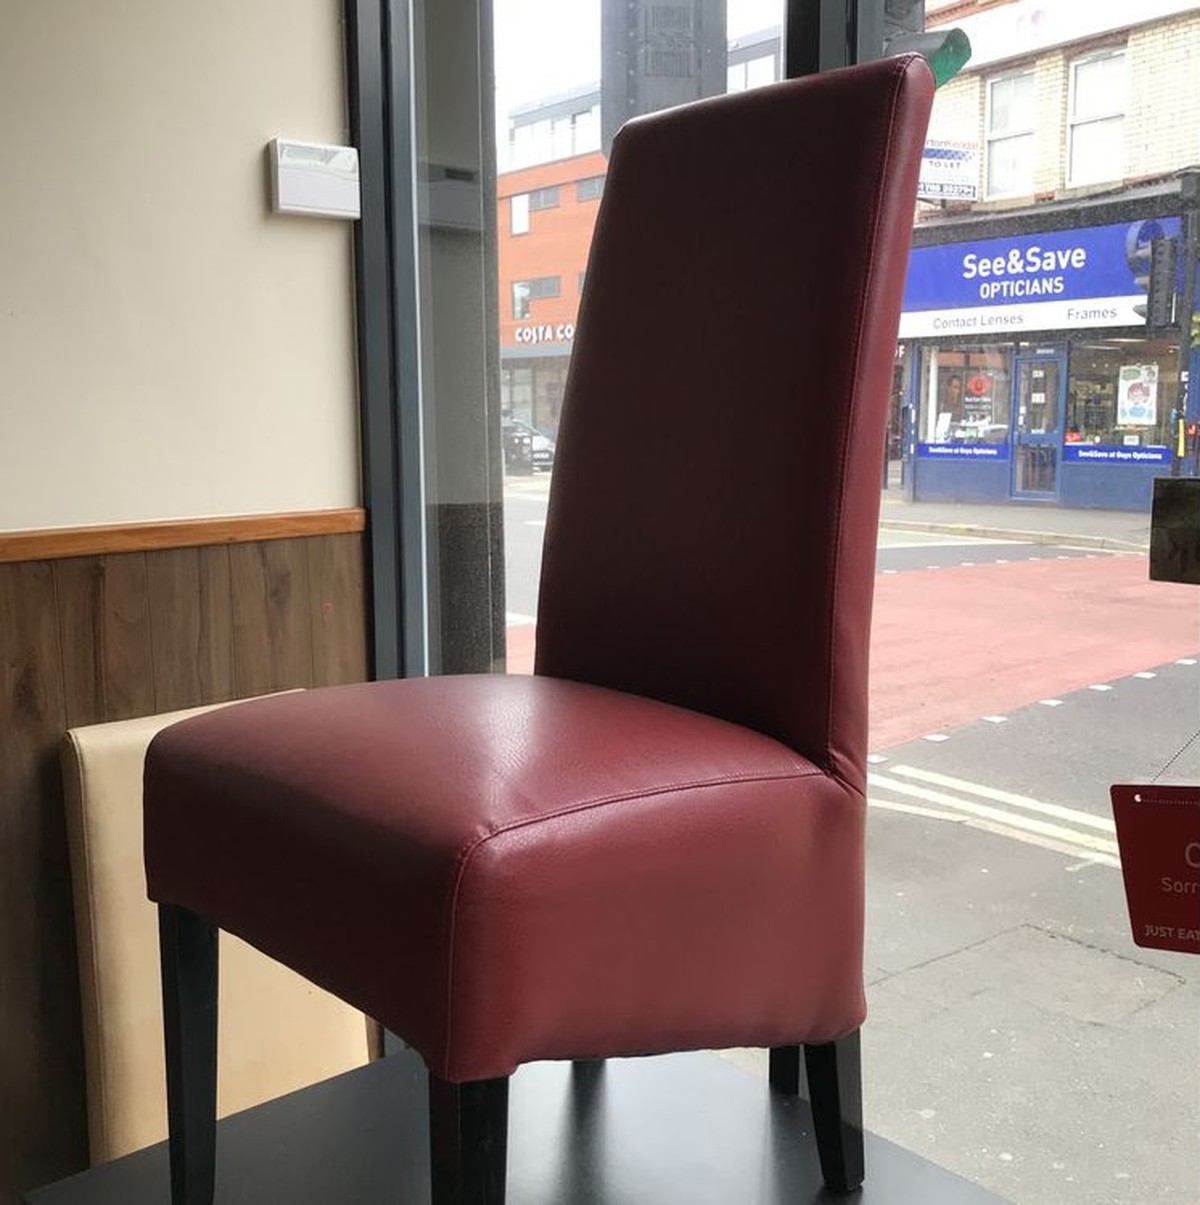 Secondhand Chairs And Tables Cafe And Restaurant Furniture 34x